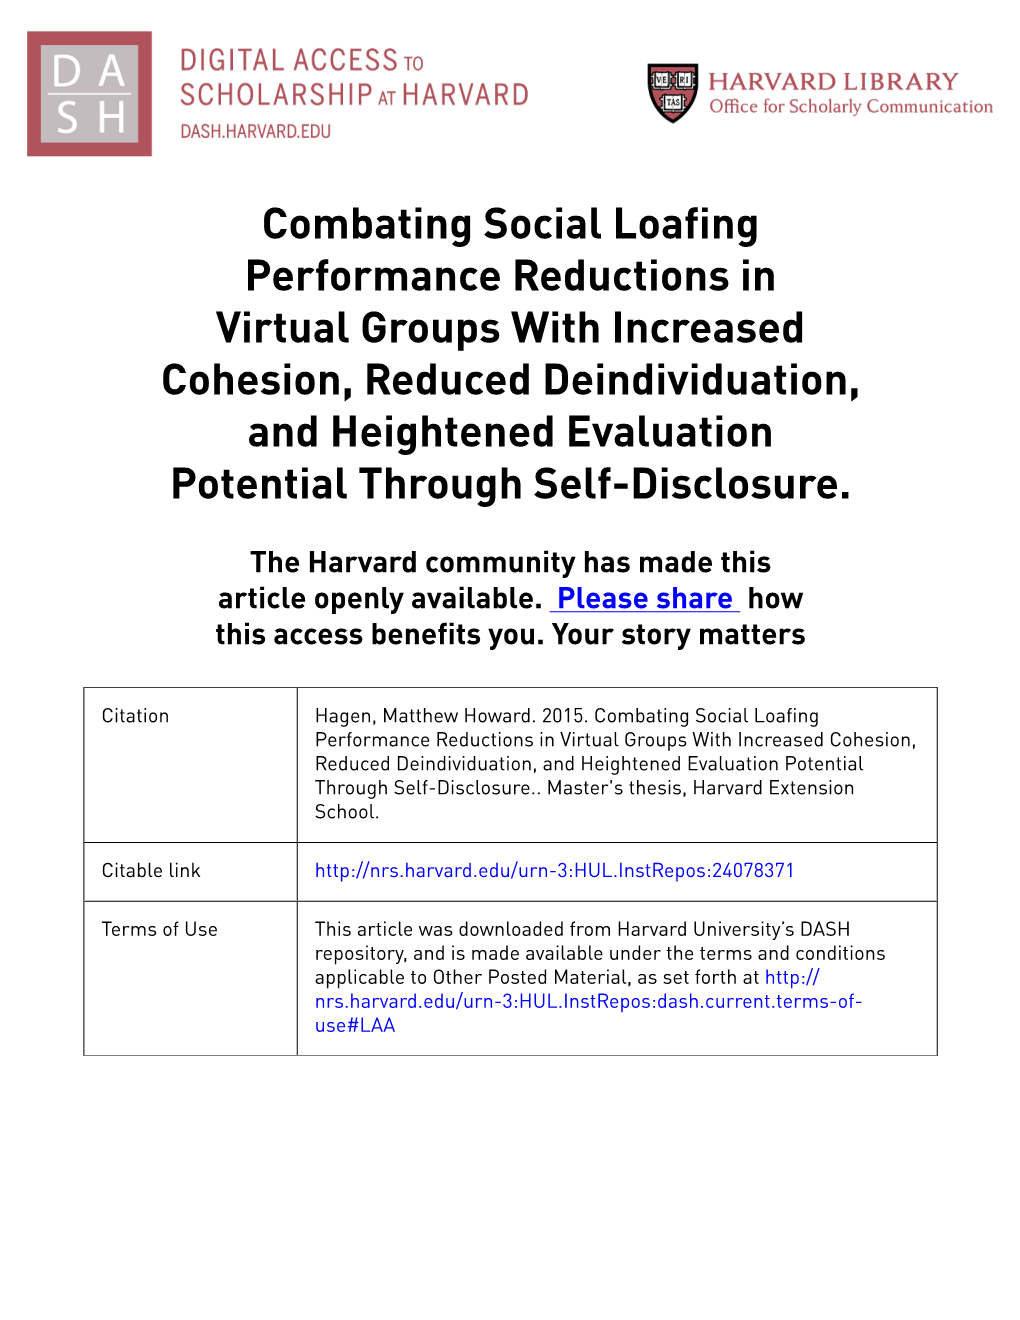 Combating Social Loafing Performance Reductions in Virtual